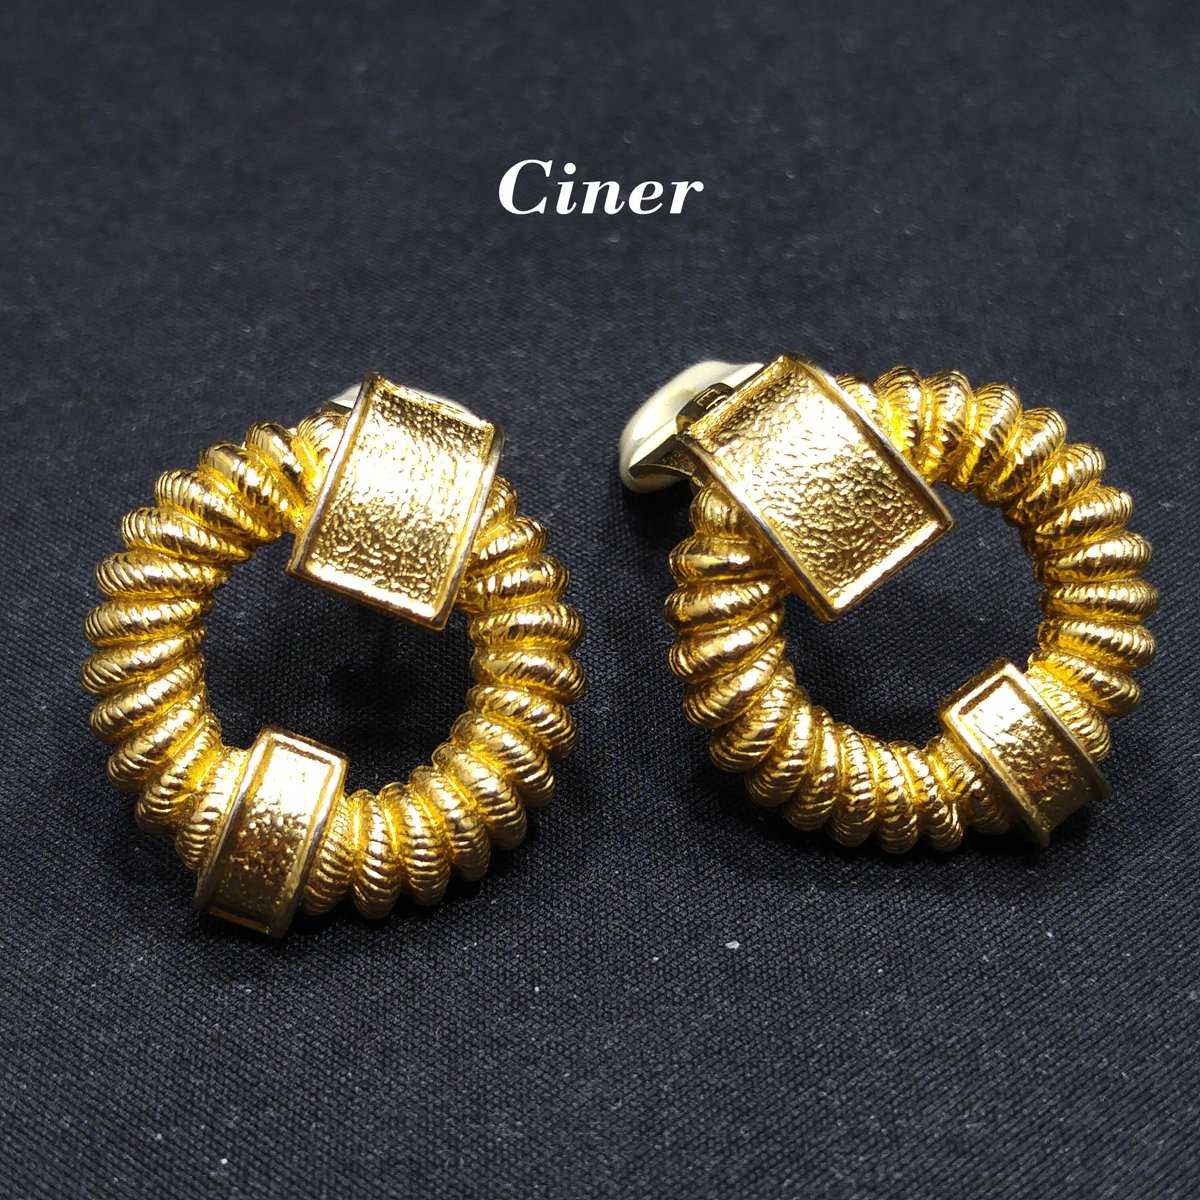 #etsy shop: Ciner Open Center Round Clip Earrings, Gold Plated, 1980s Vintage Jewelry etsy.me/3BRZMTV #gold #circle #women #cinerearrings #designerearrings #designerjewelry #vintageearrings #vintagejewelry #vintagegift